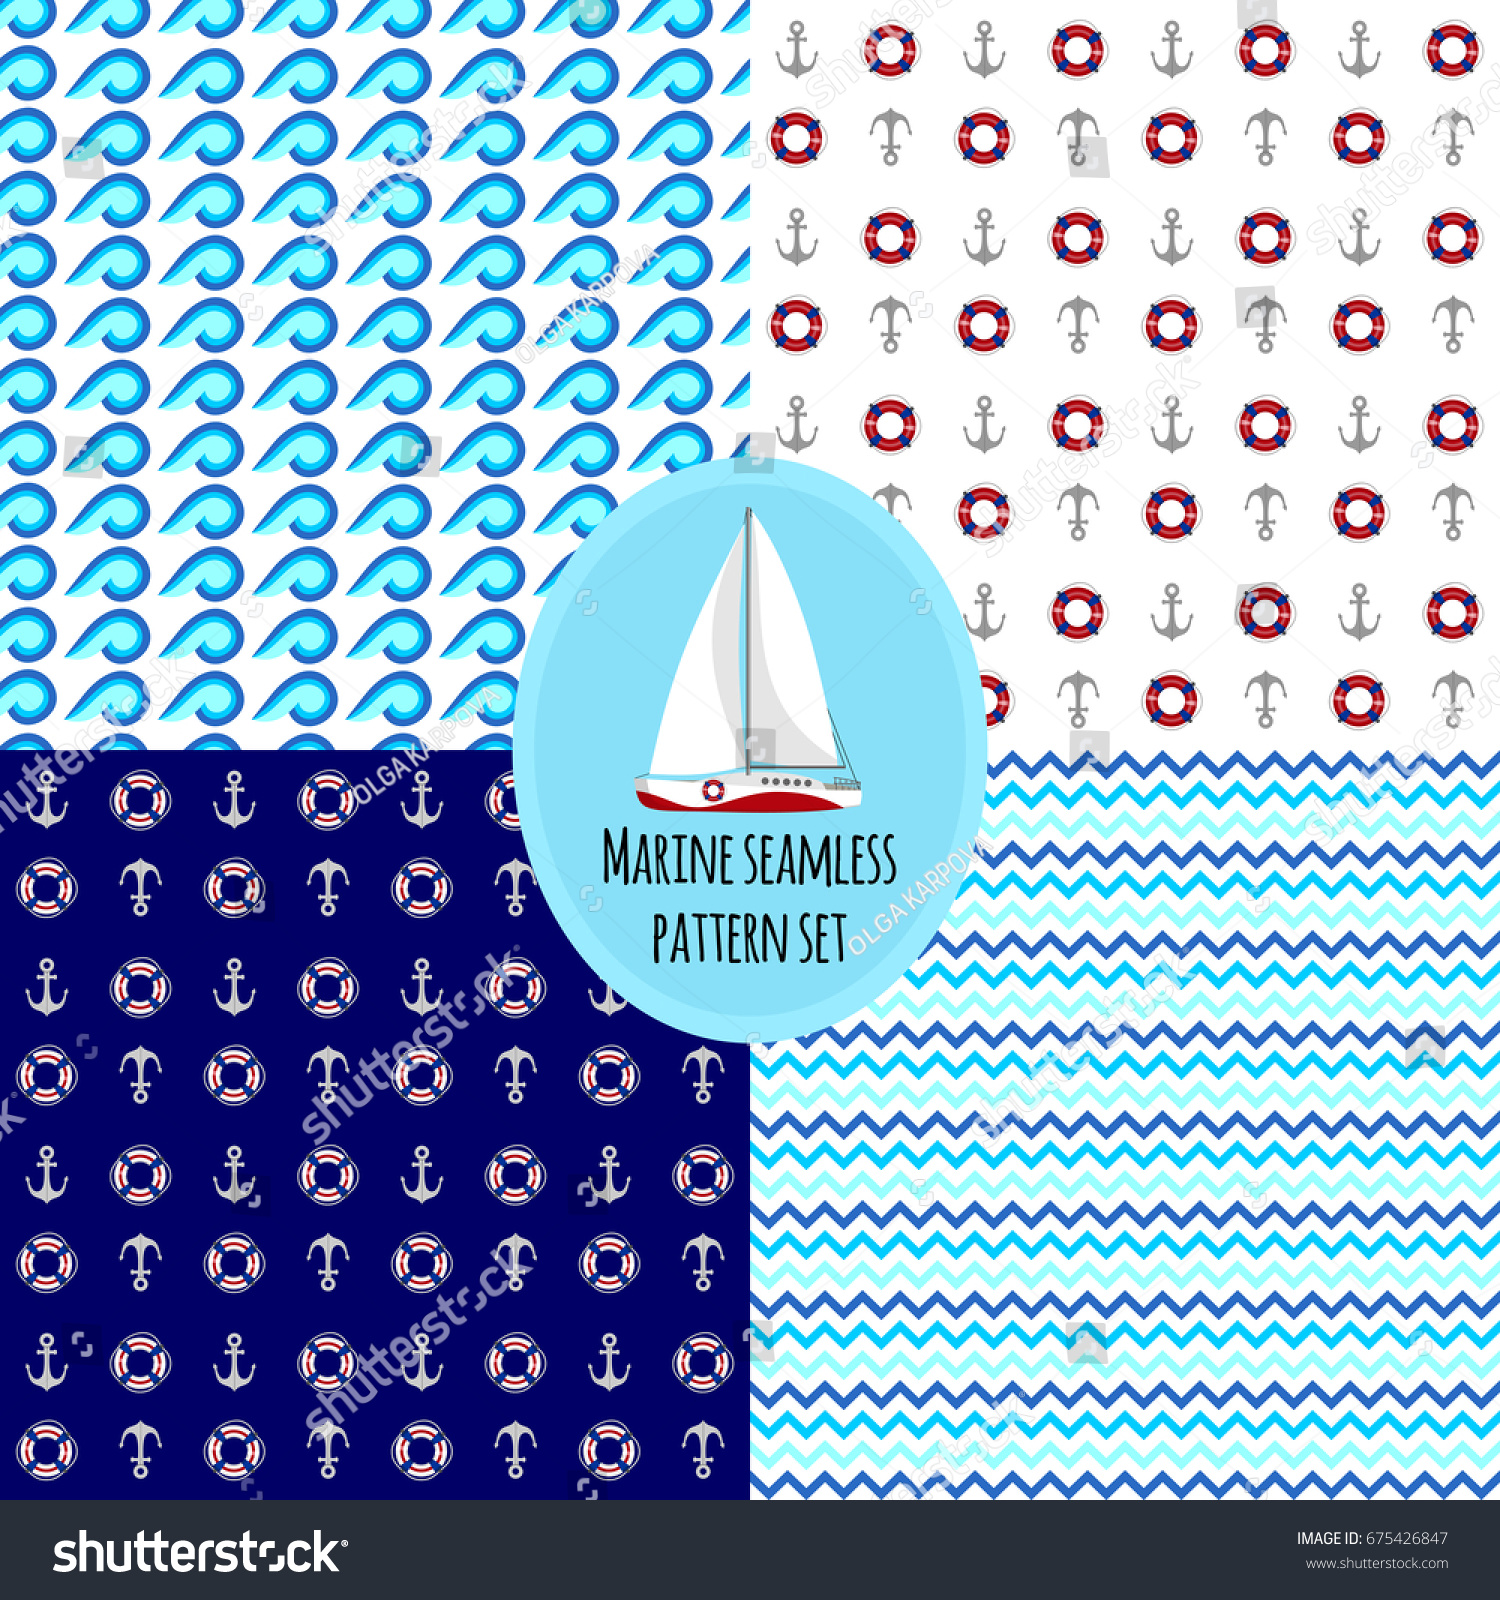 SVG of Set of marine nautical seamless patterns with anchors, safety rings, tangled waves, zigzag chevron lines, and yacht illustration as bonus. Good for textile fabric or paper print. svg